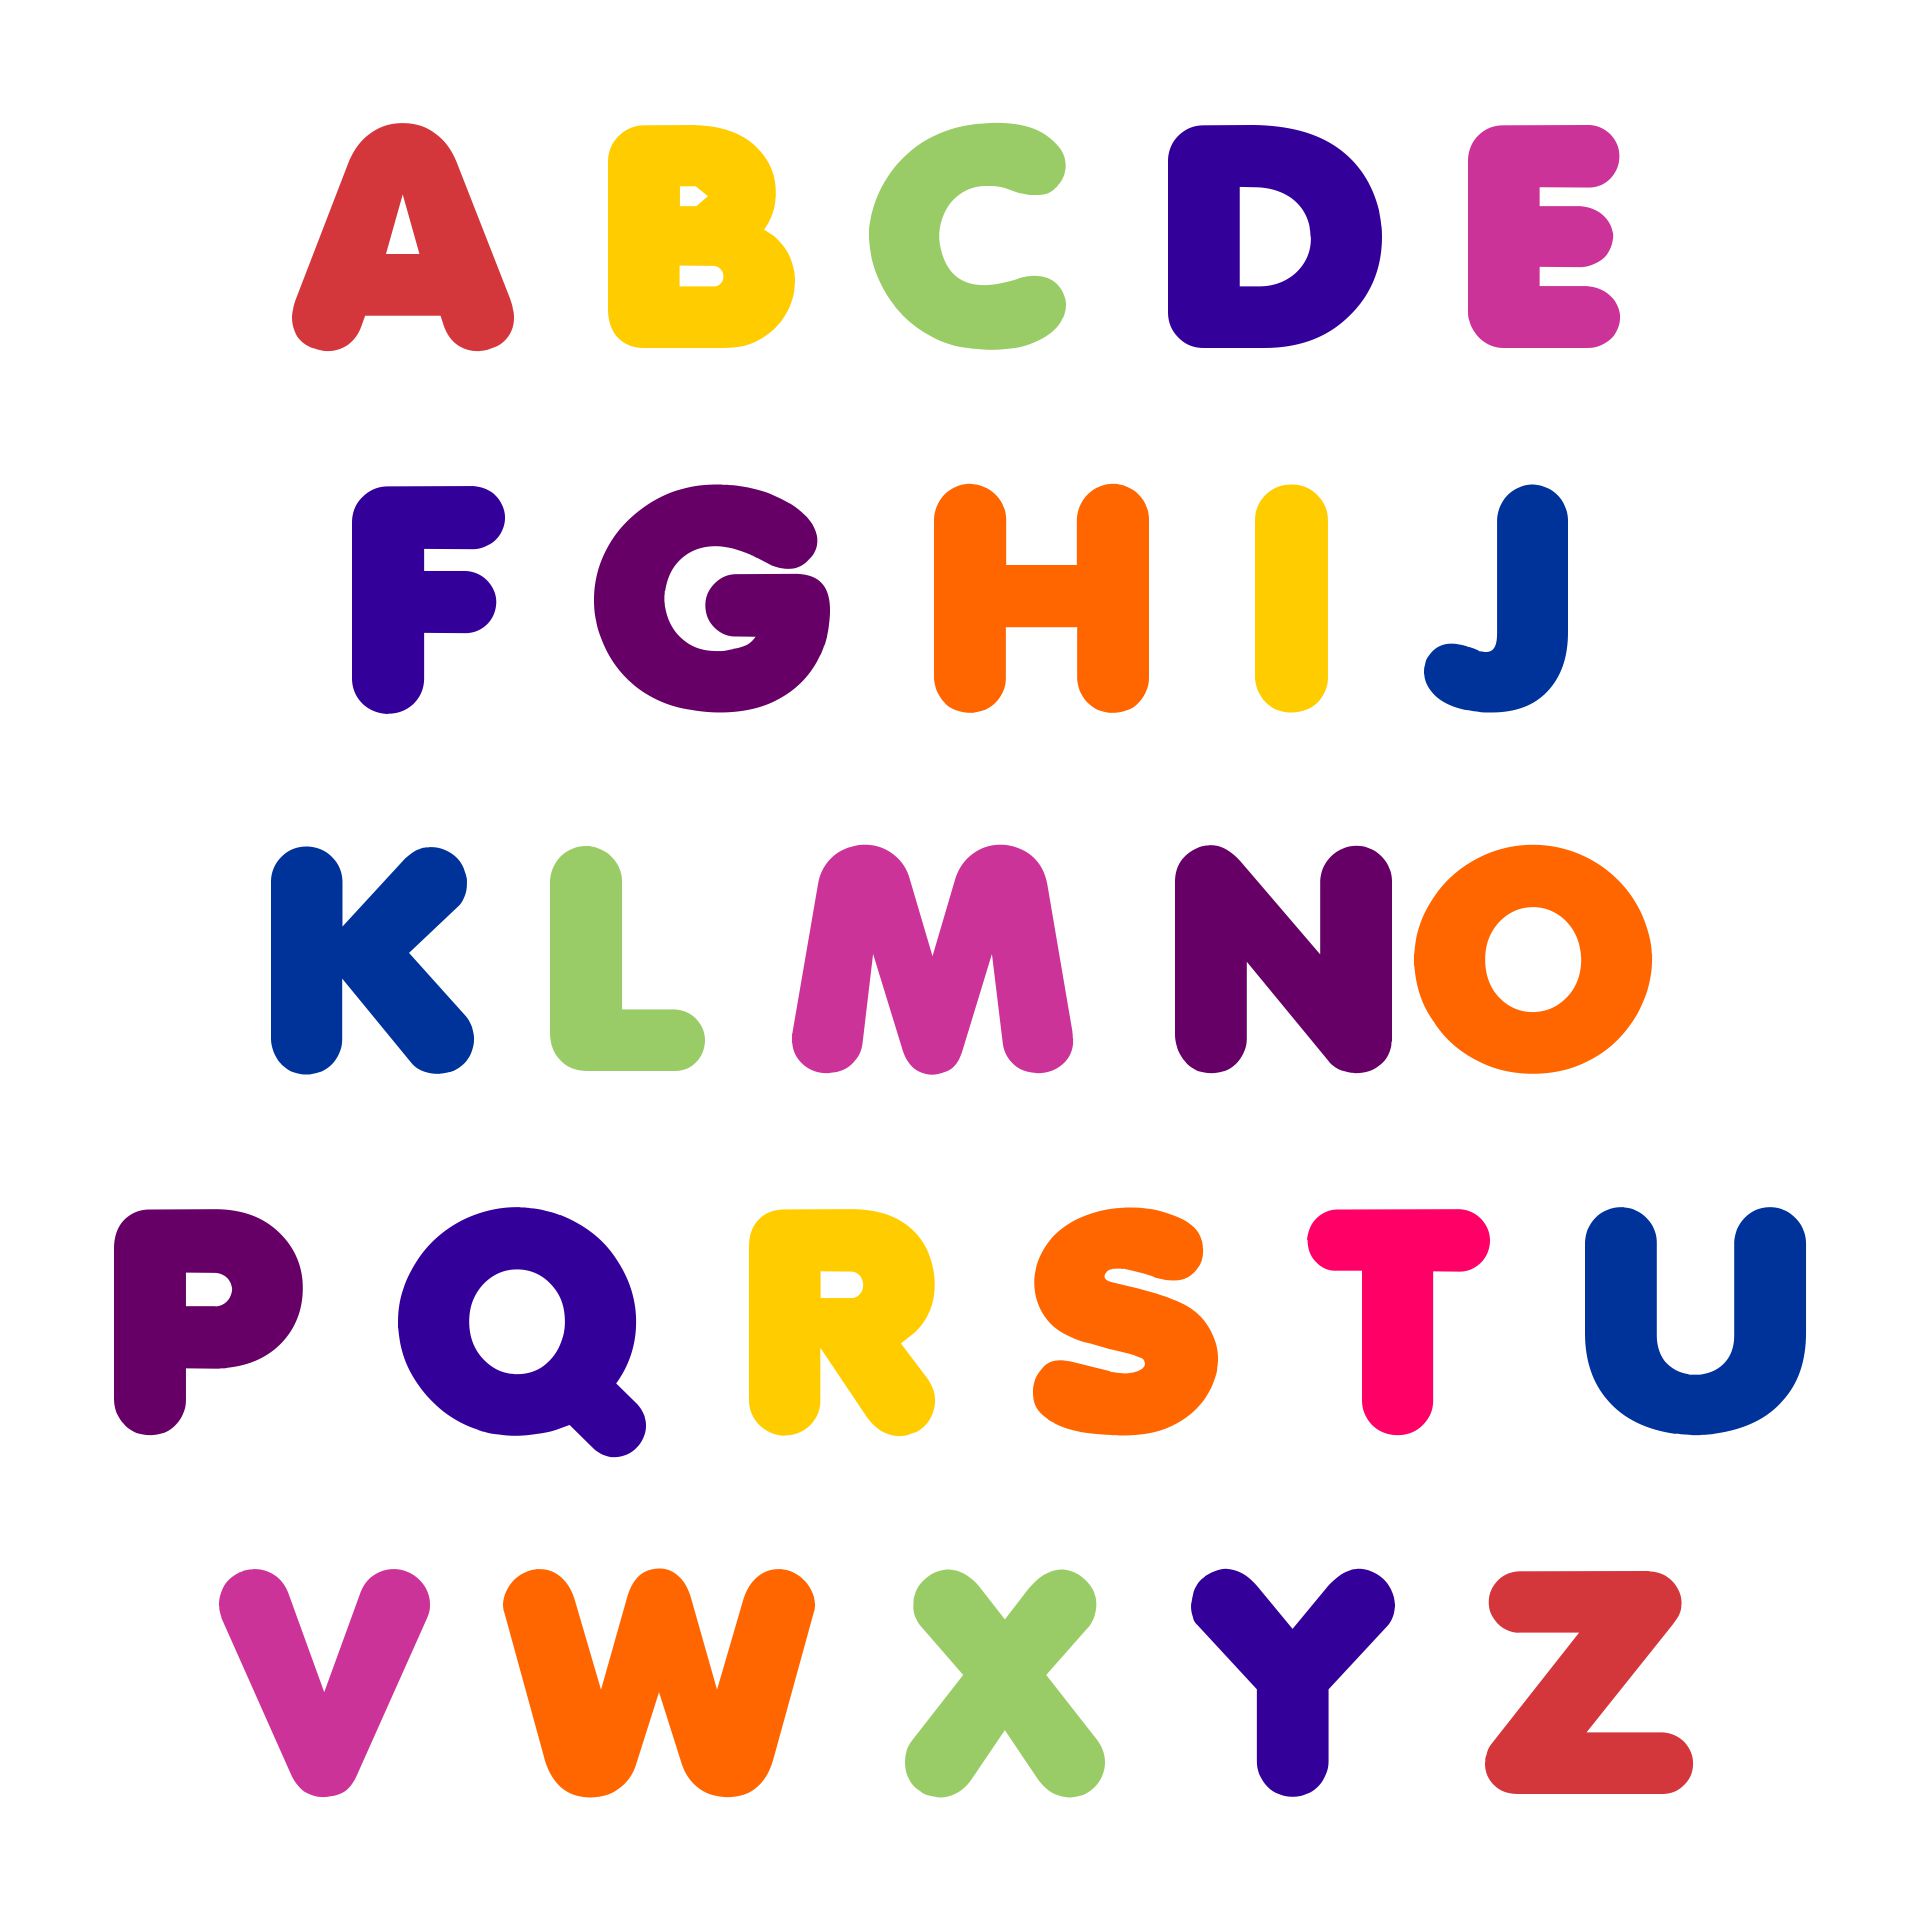 Colored Bubble Letter Font - 20 Free PDF Printables | Printablee